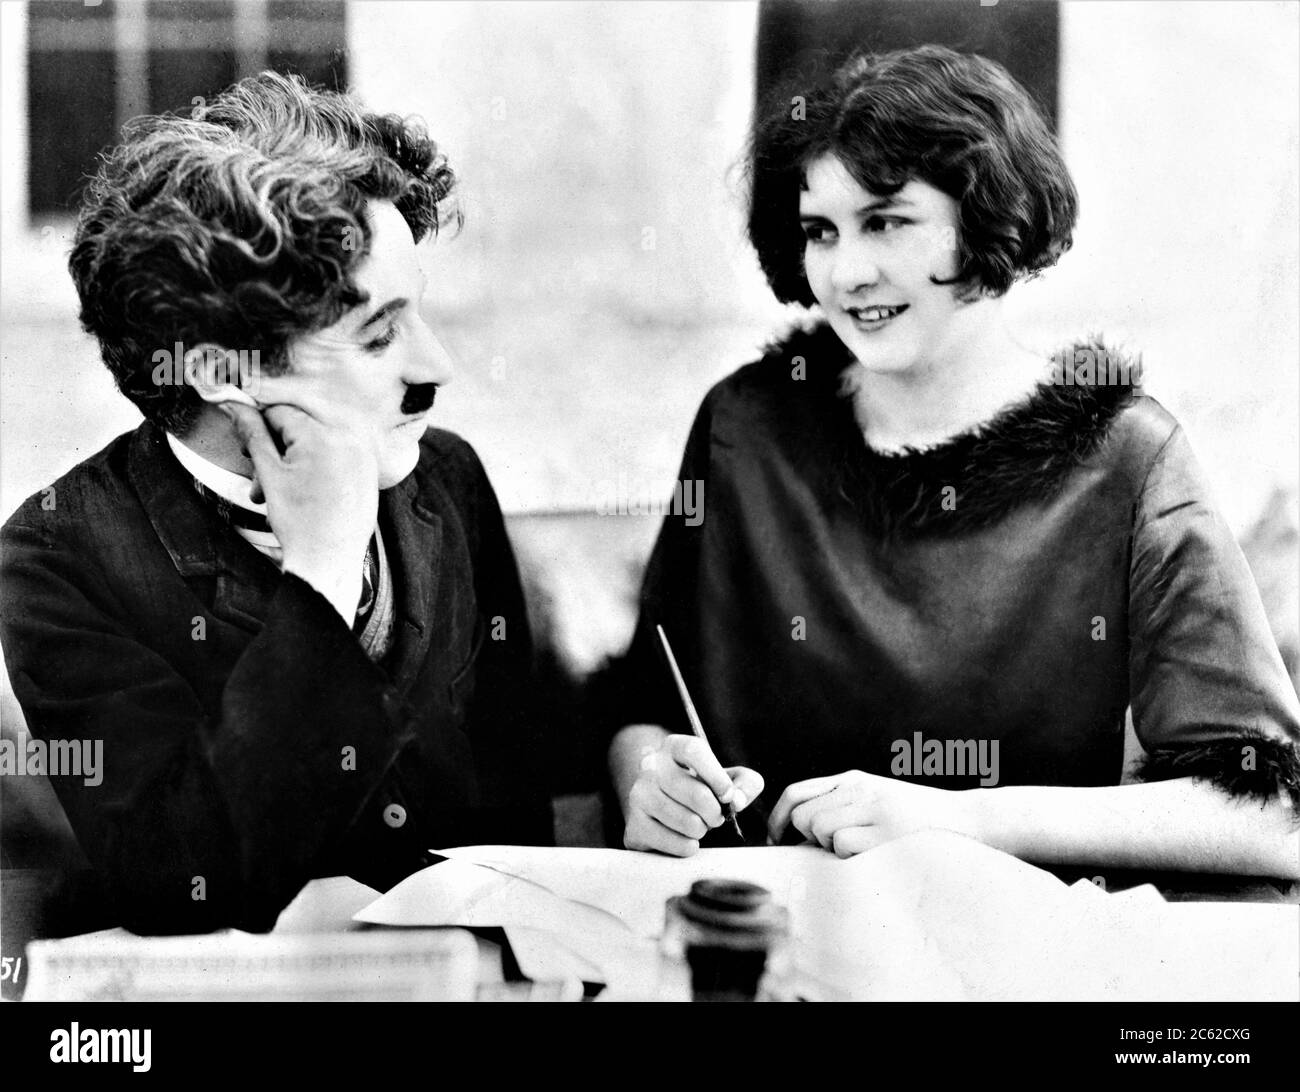 CHARLIE CHAPLIN and his new leading lady 15 year old LITA GREY signing contract to appear in THE GOLD RUSH 1925 director / writer CHARLES CHAPLIN Charles Chaplin Productions / United Artists Stock Photo